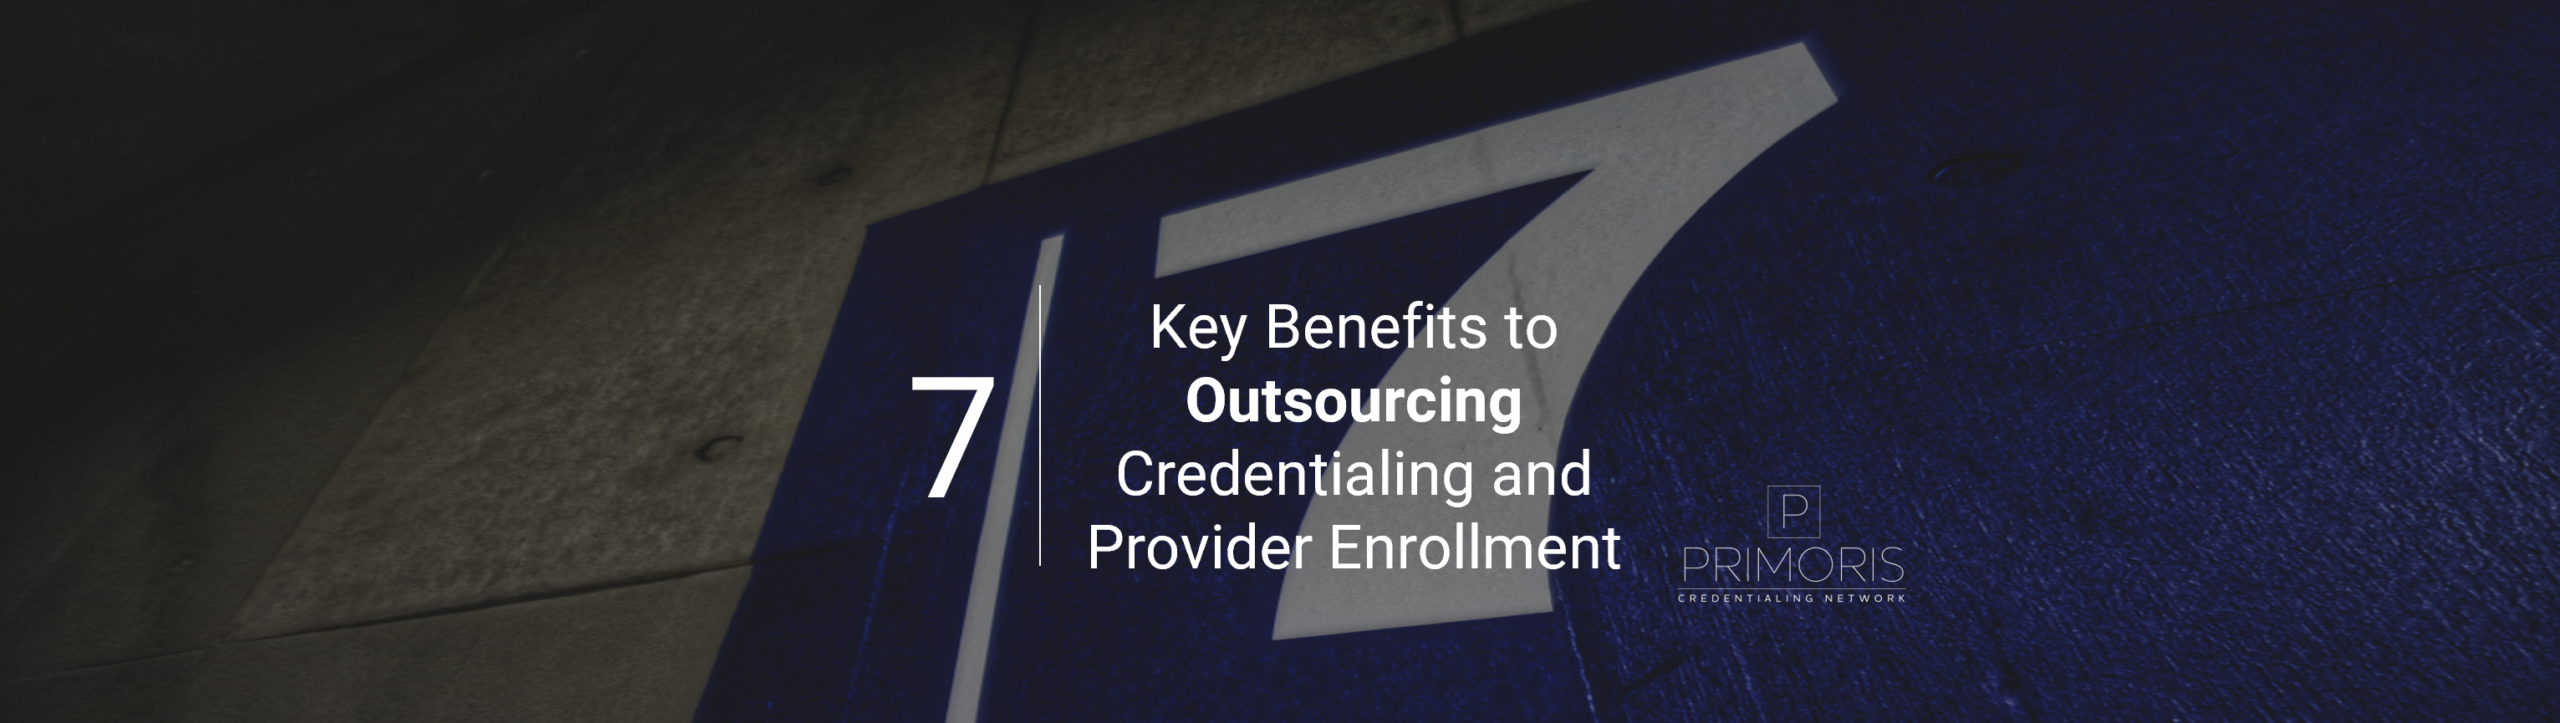 7 key benefits to outsourcing credentialing